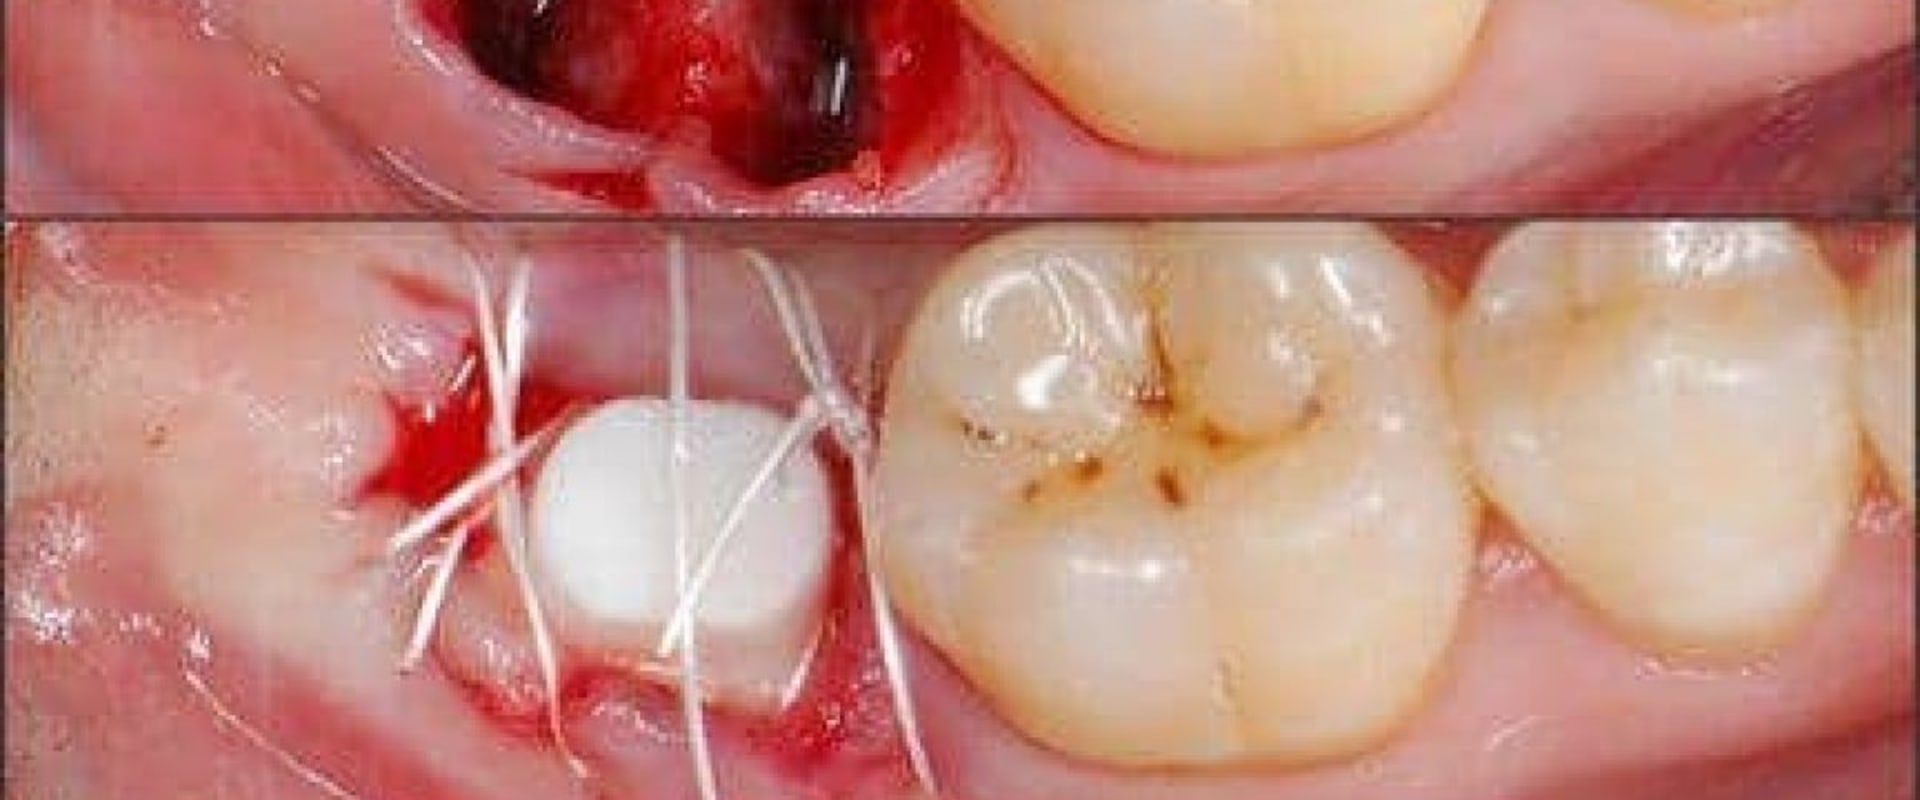 How Long Does it Take for Gums to Heal After Implant Surgery?